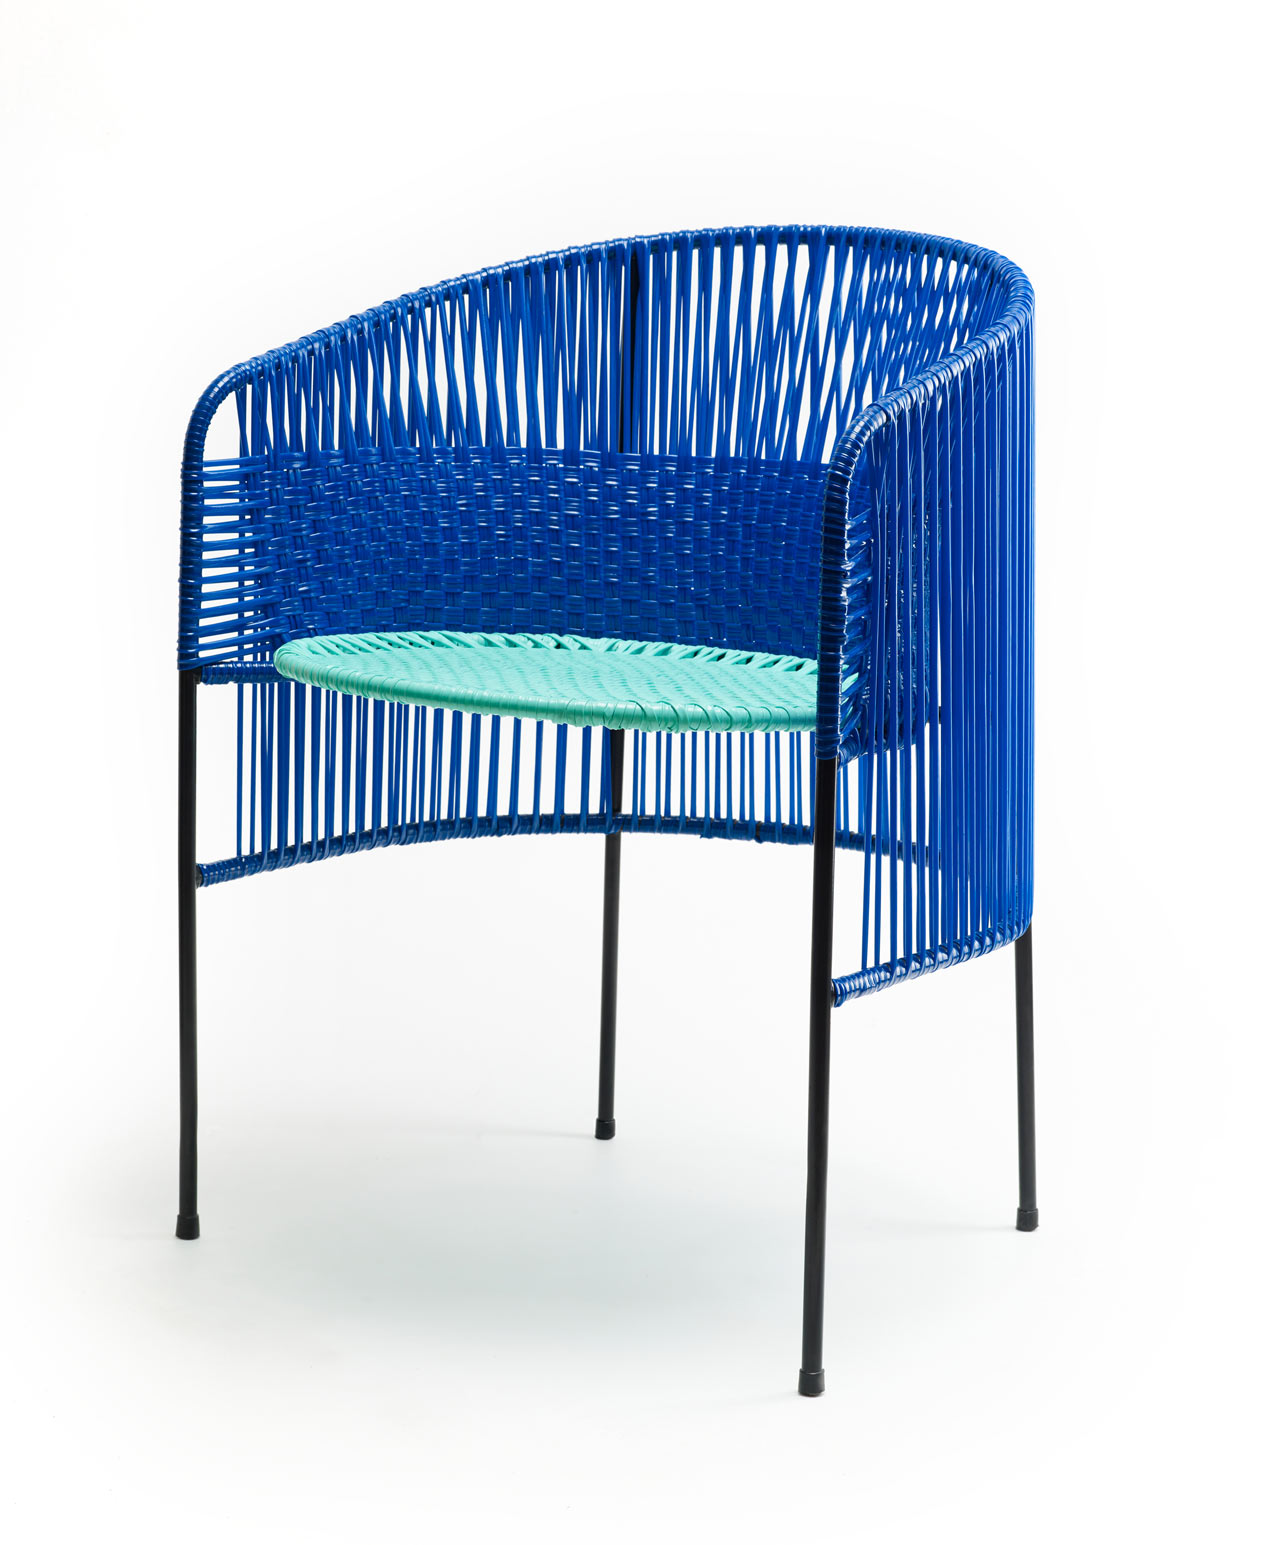 ames Launches CARIBE, a Colorful Outdoor Collection Made of Recycled Plastic-6